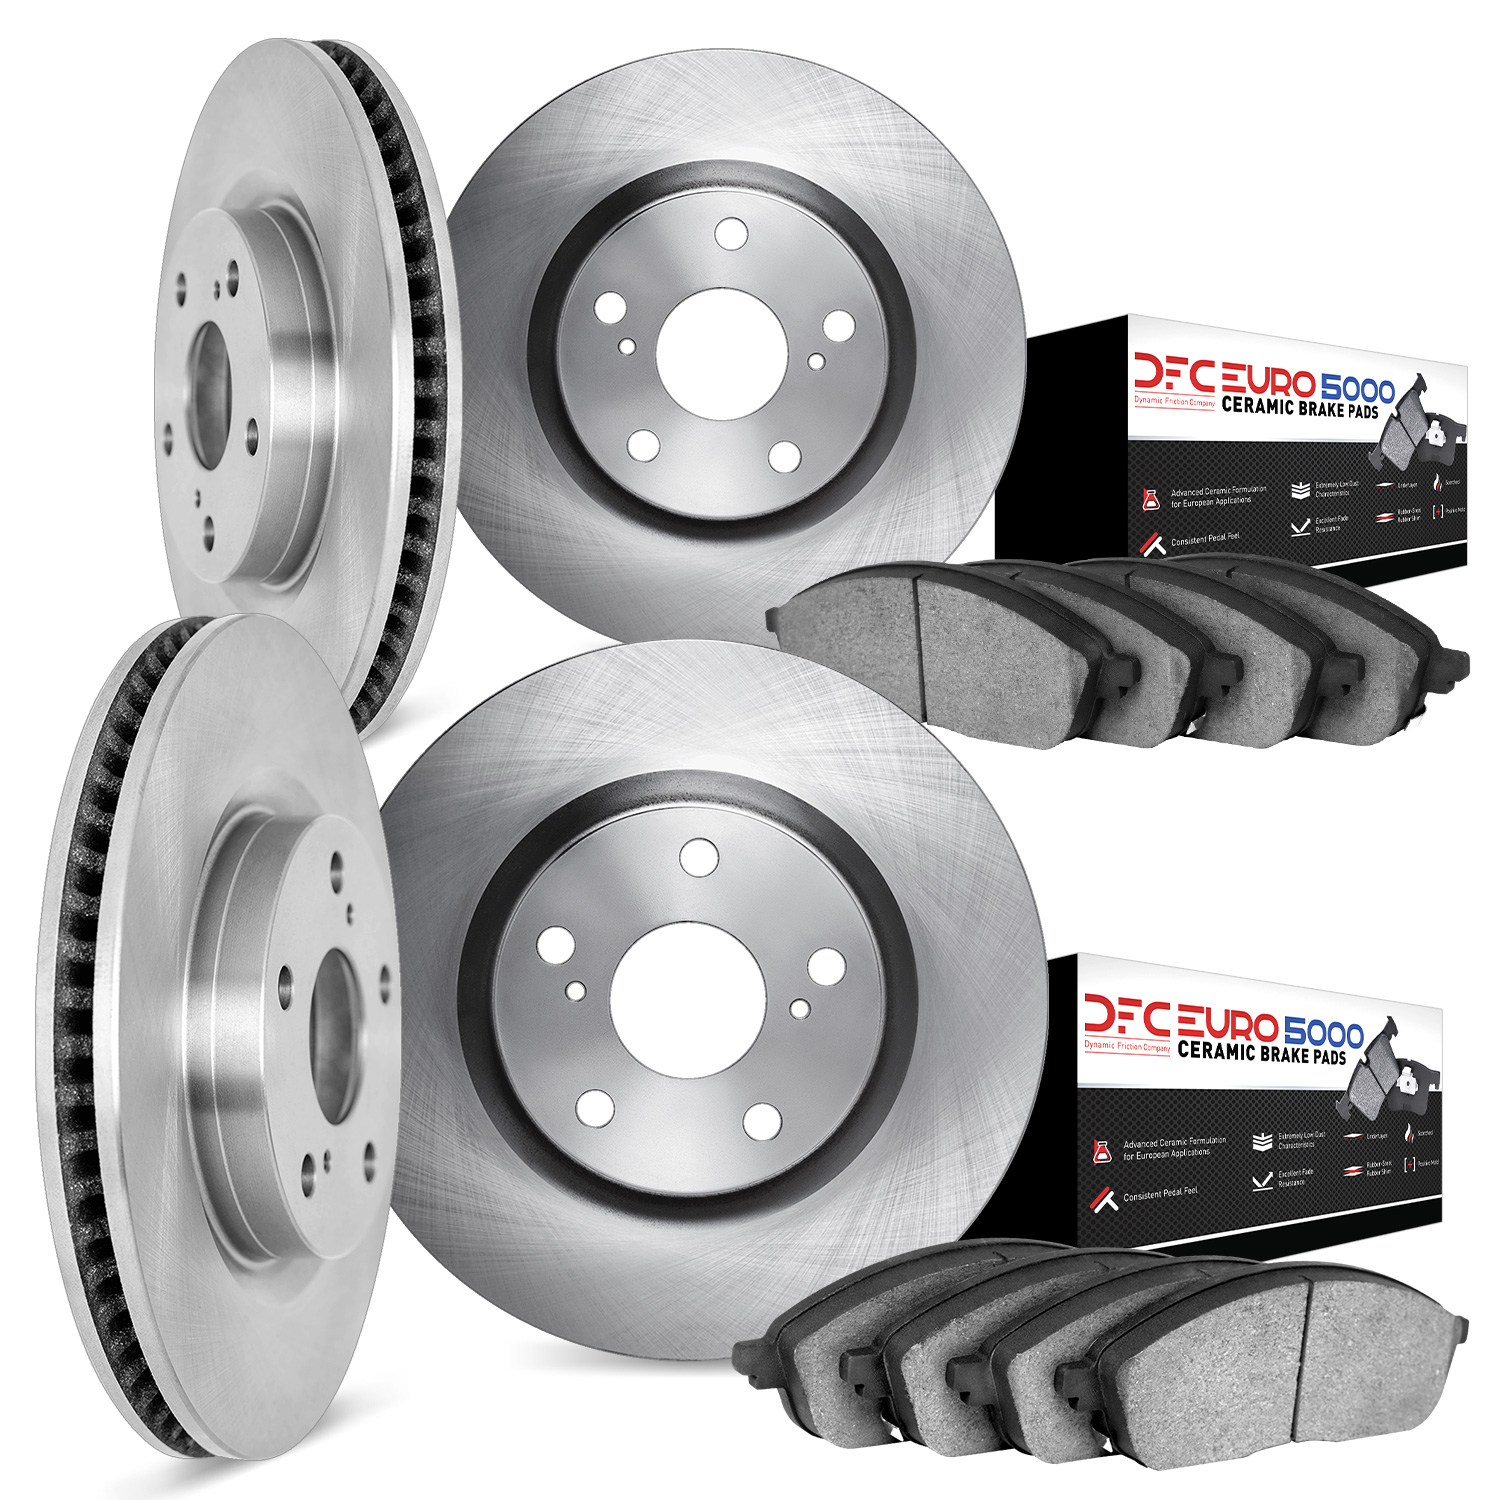 6604-31023 Brake Rotors w/5000 Euro Ceramic Brake Pads, 2013-2013 BMW, Position: Front and Rear